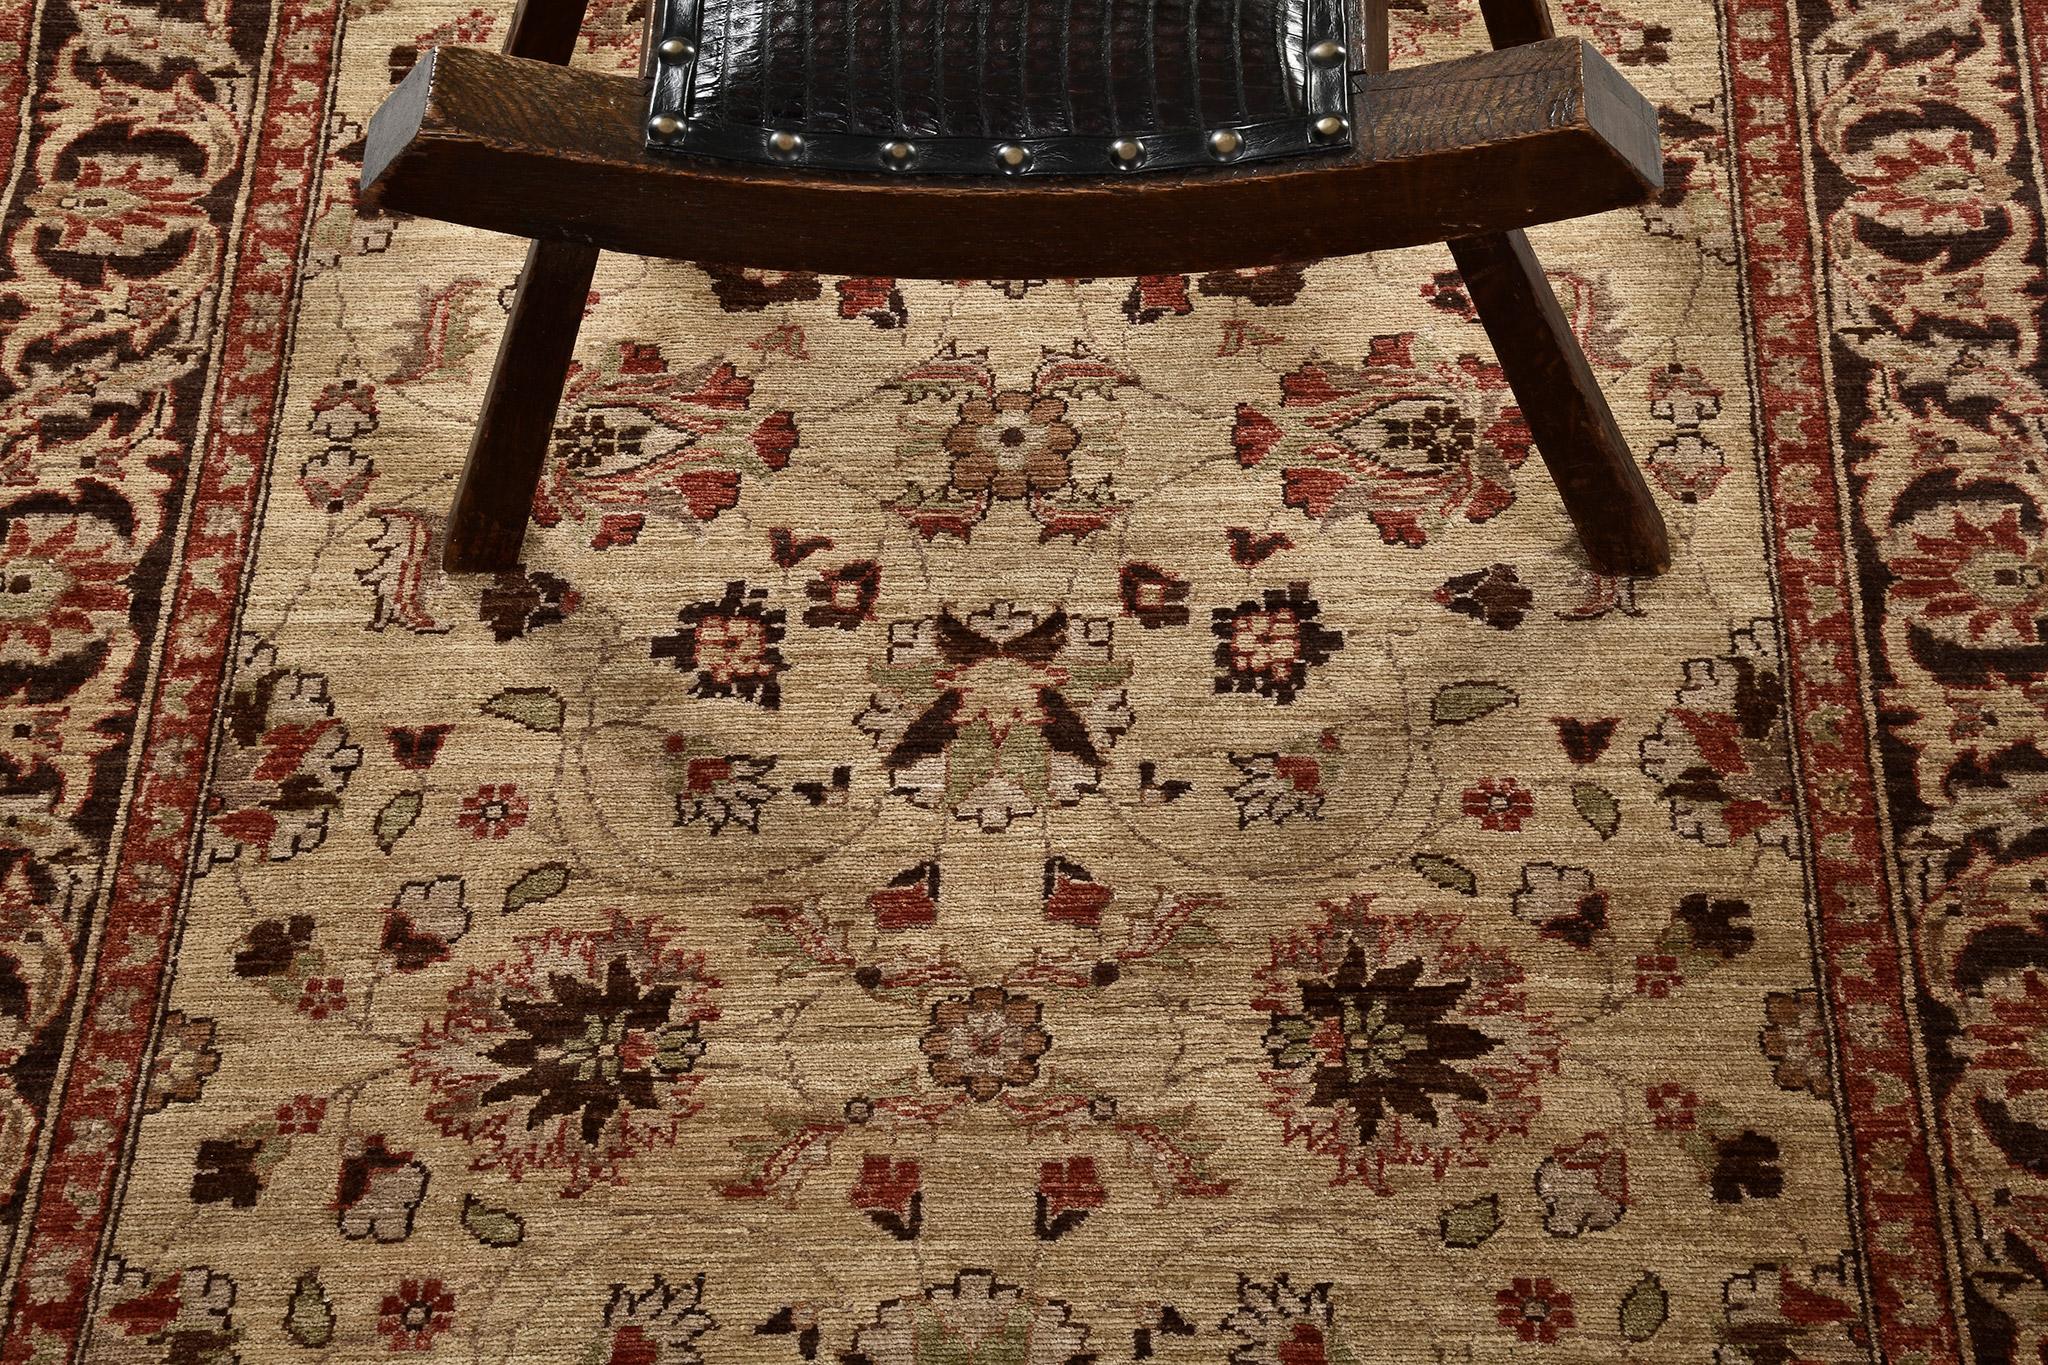 A stylish revival of Sultanabad design rug from Divine Collection featured the red velvet, maroon and cinnamon hues that perfectly inclined and experience the taste of luxury. A symmetric florid designs that beautifully woven with leafy scrolls and